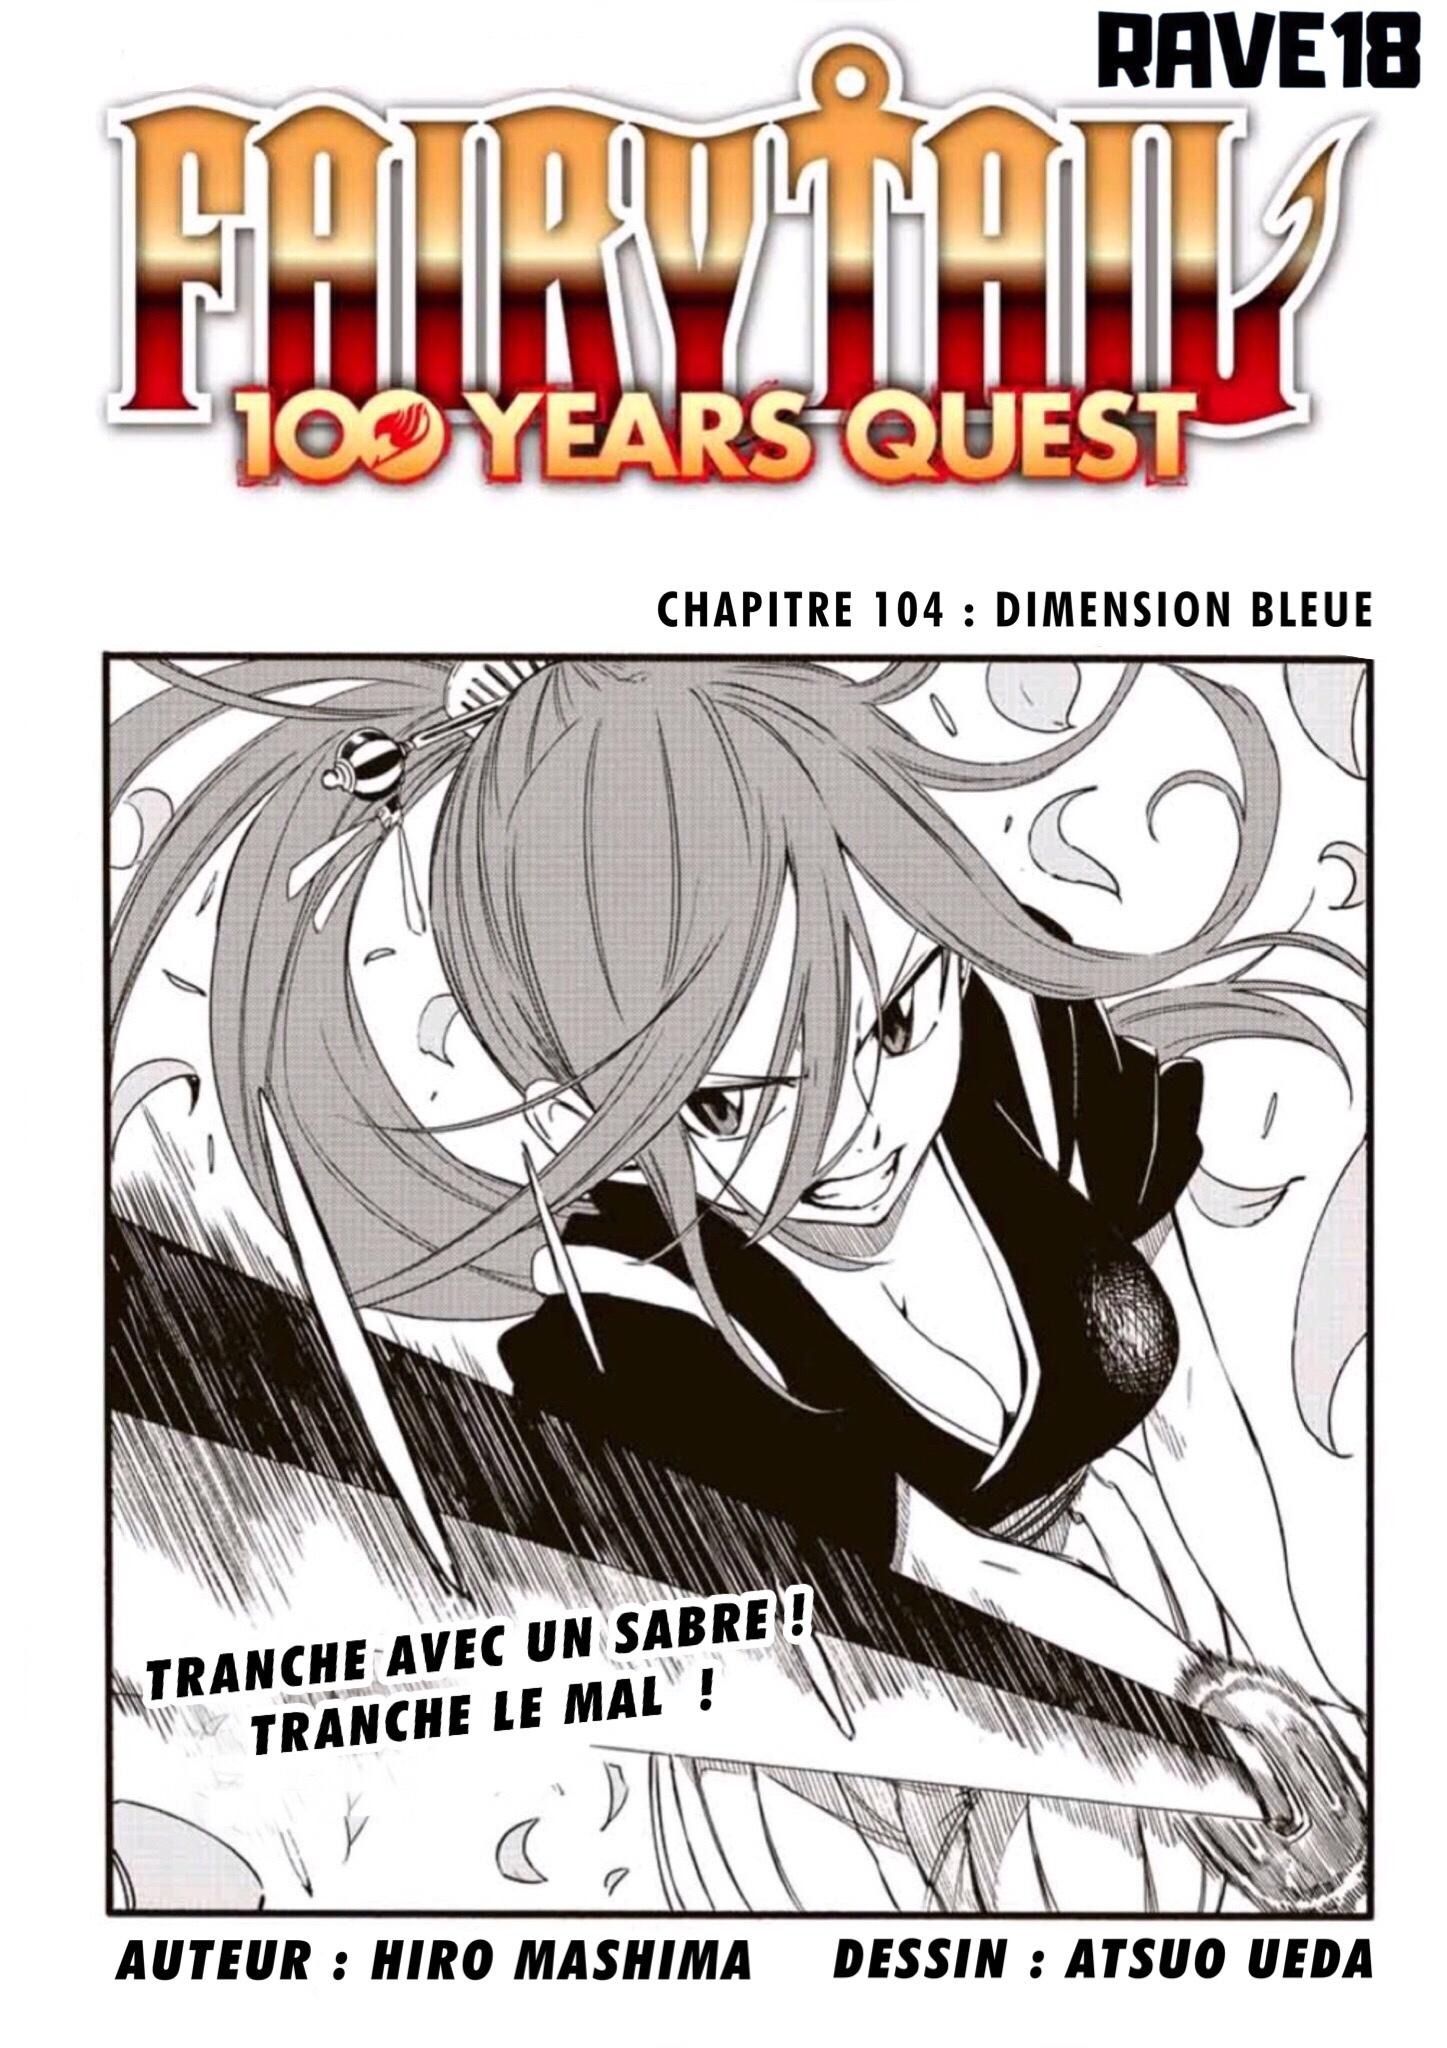 Fairy Tail 100 Years Quest: Chapter 104 - Page 1